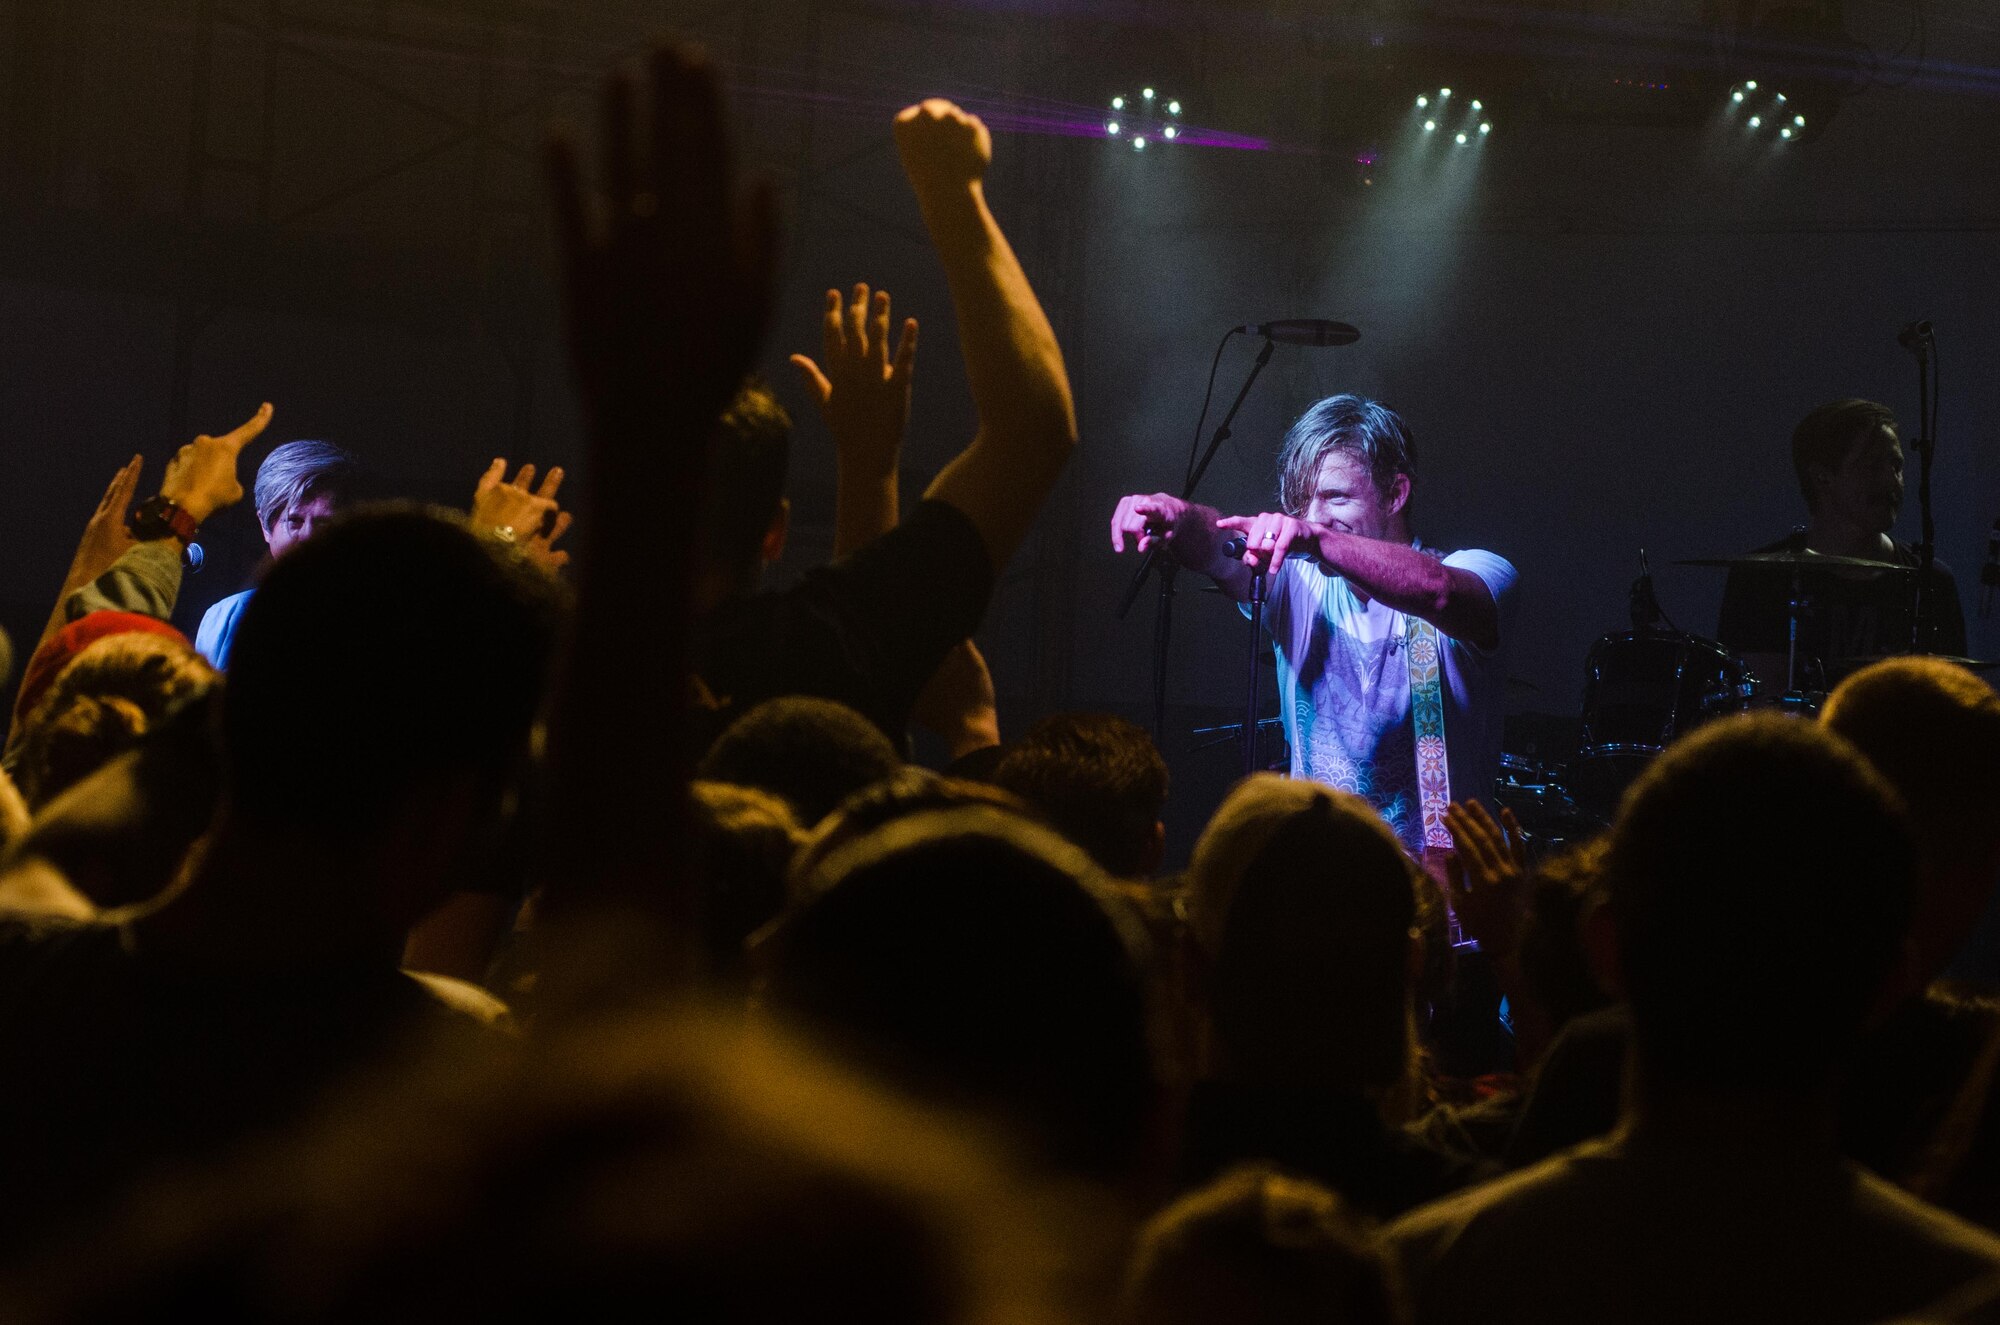 Switchfoot frontman Jon Foreman interacts with his audience Nov. 21, 2015, at Andersen Air Force Base, Guam. The alternative rock band performed two free concerts for service members and families assigned to the island. (U.S. Air Force photo by Staff Sgt. Alexander W. Riedel/Released)